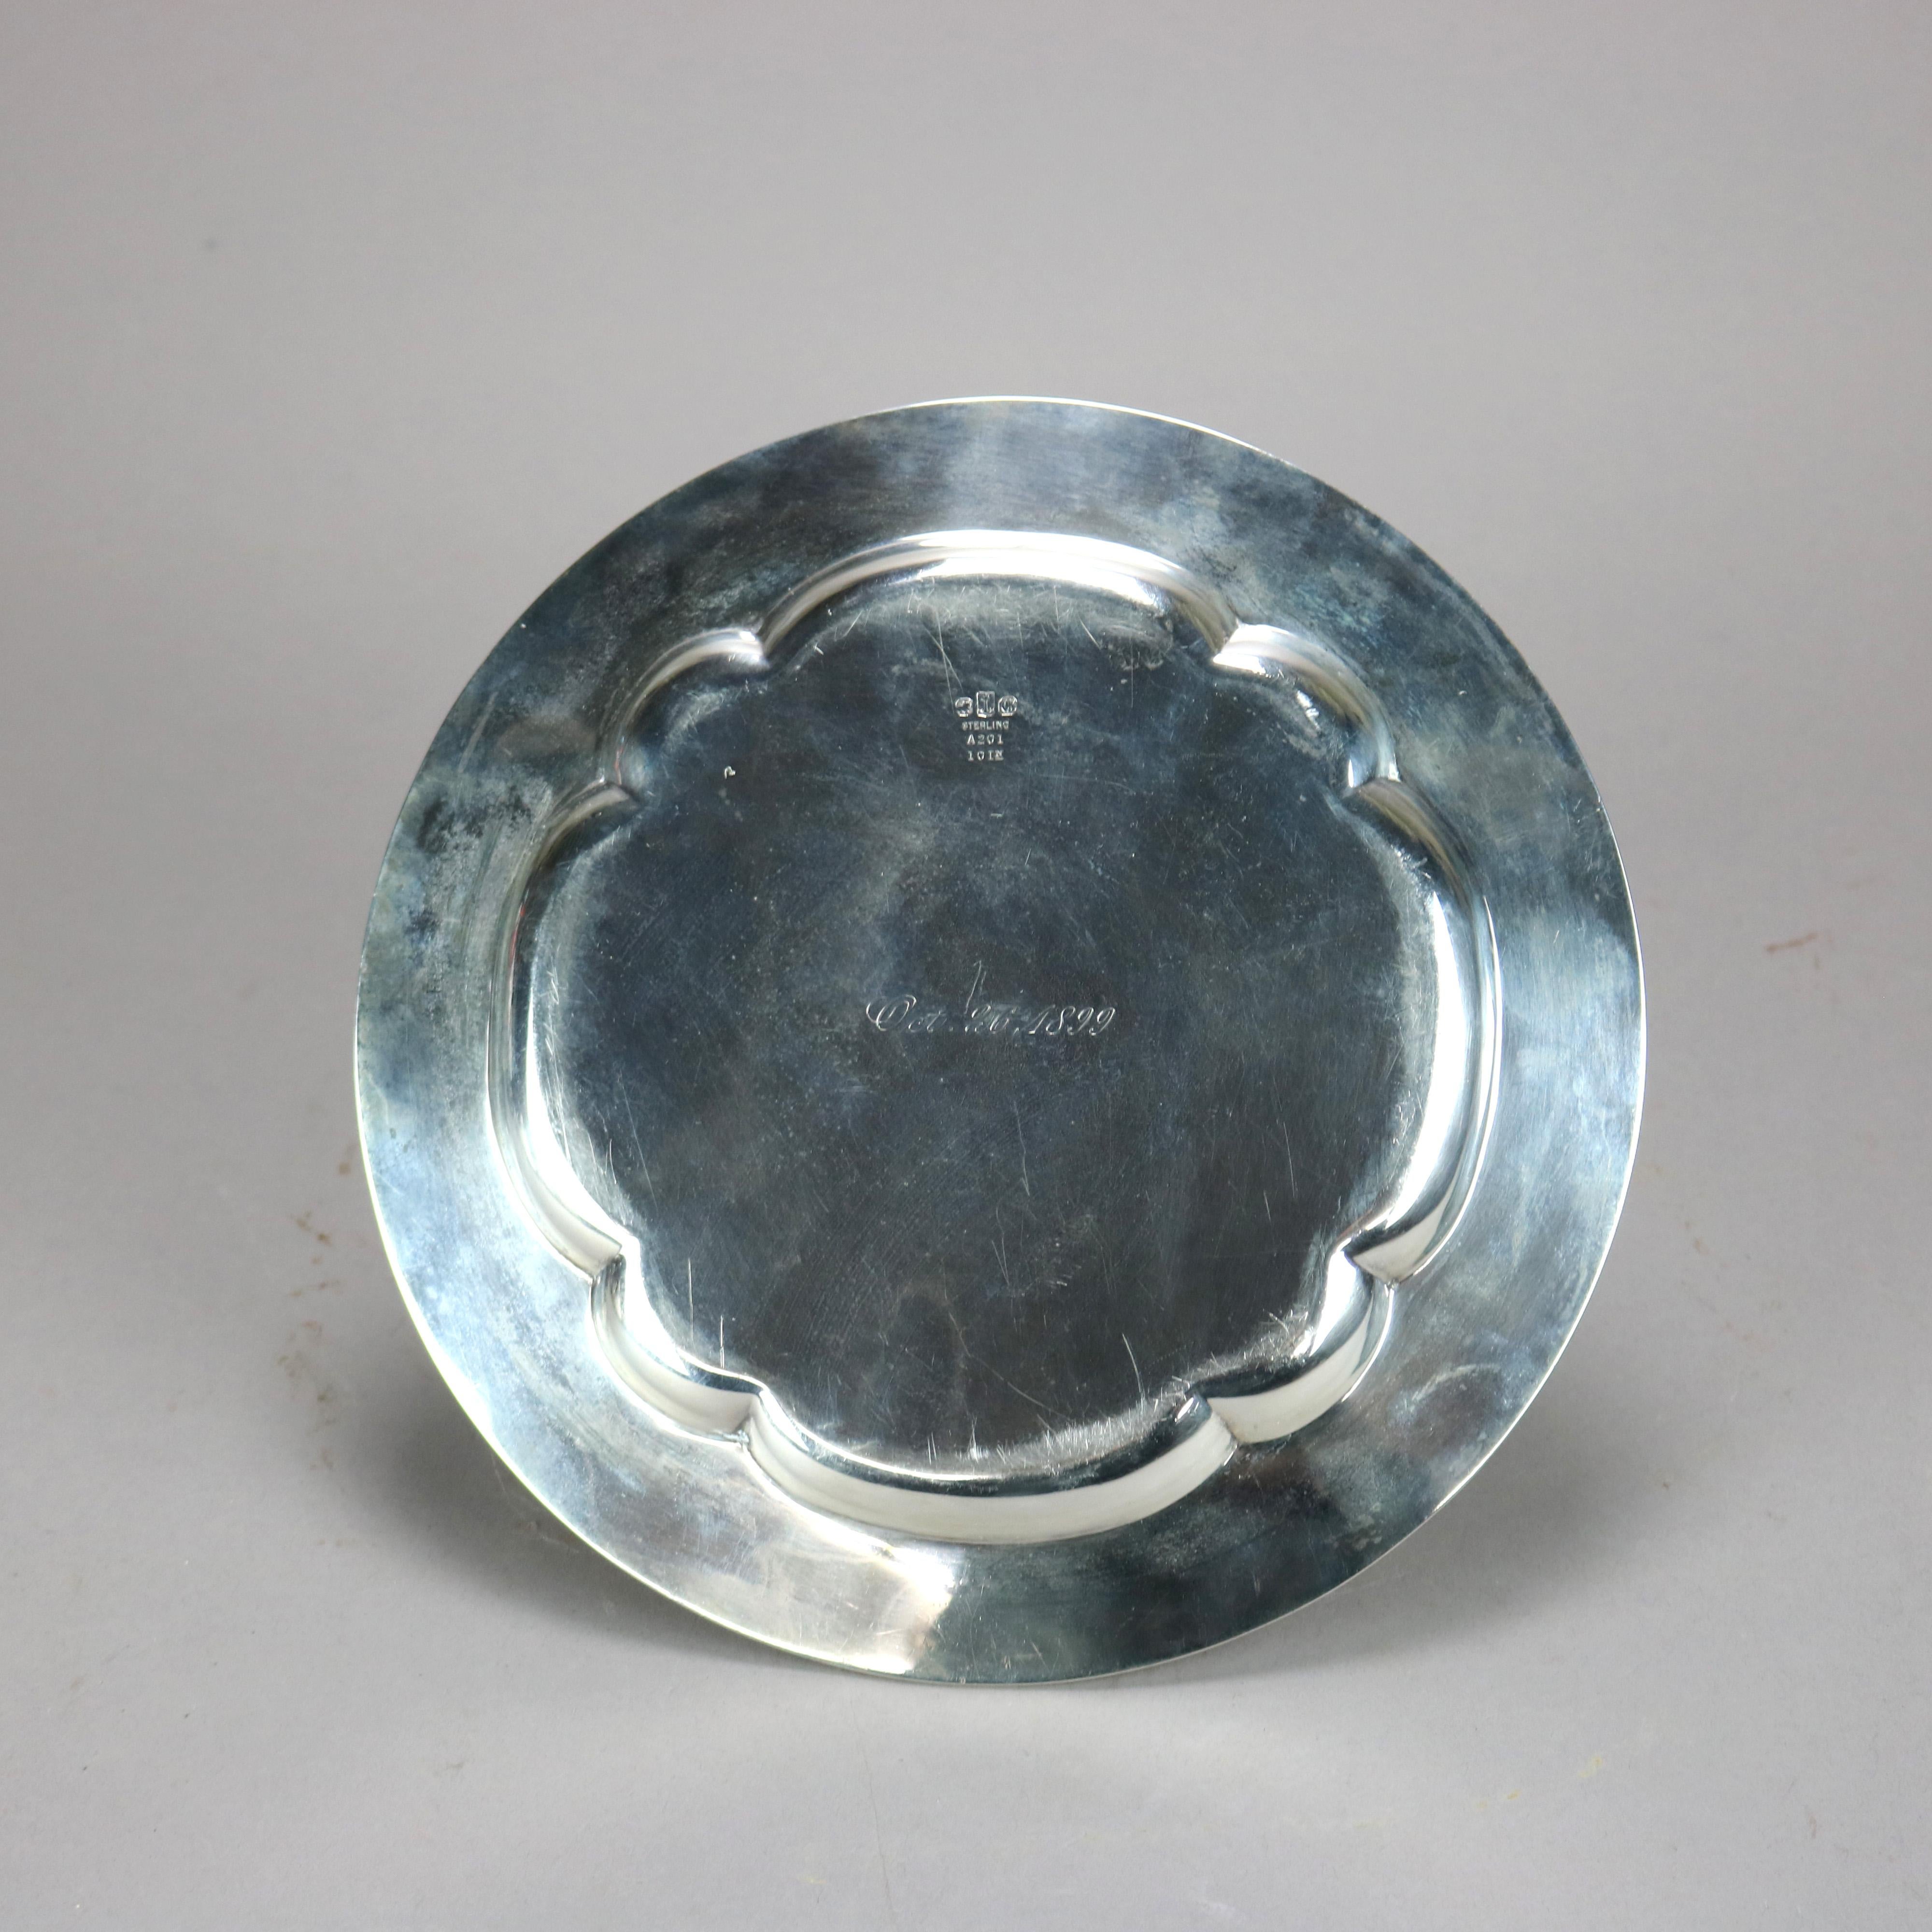 19th Century Antique Gorham Sterling Silver Tray 17.43 toz, Dated 1899